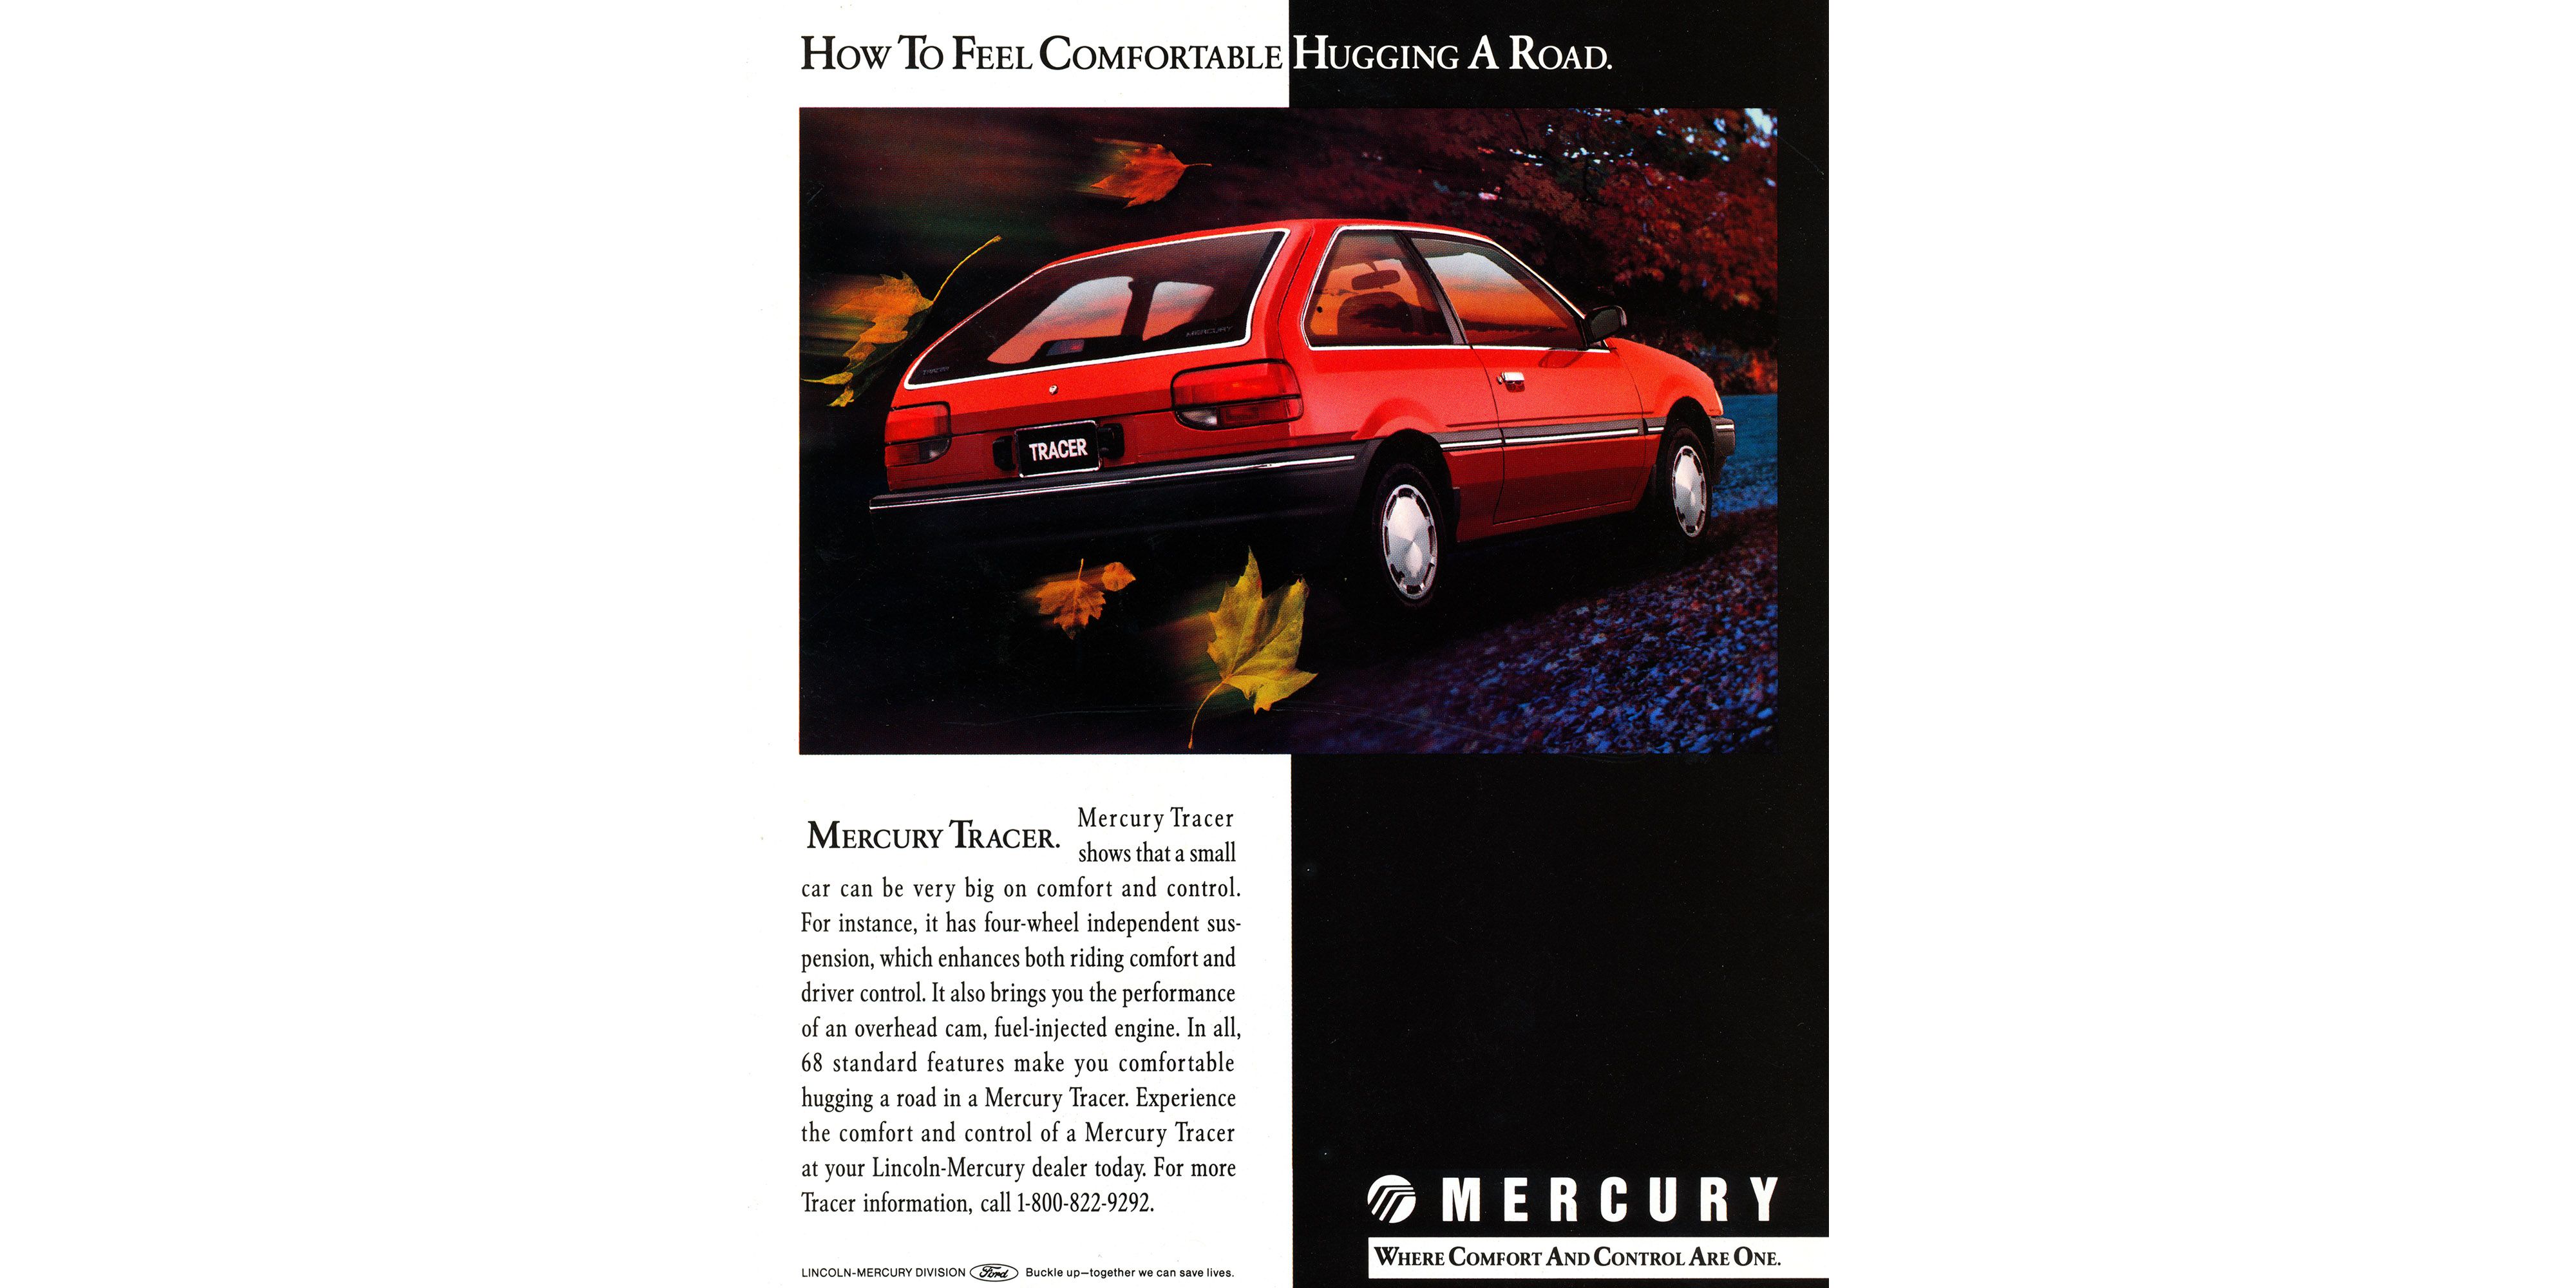 1989 Mercury Tracer Makes You Feel Comfortable Hugging a Road